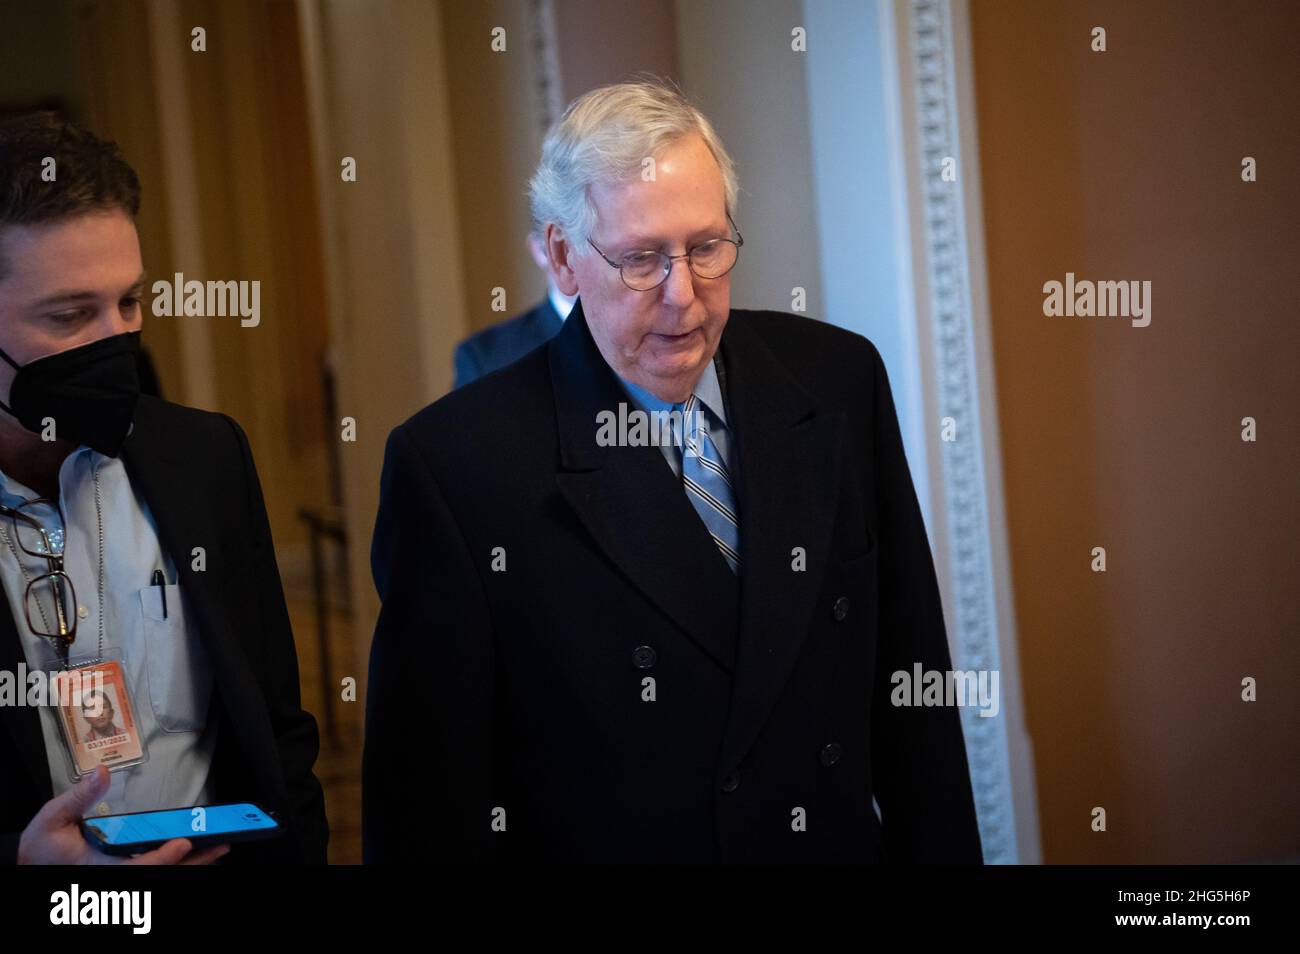 Washington, USA. 18th Jan, 2022. Senator Mitch McConnell (R-KY), the Senate Minority Leader, speaks to media at the U.S. Capitol, in Washington, DC, on Tuesday, January 18, 2022. Congress returns from a long weekend, with Democrats continuing to push voting rights legislation in the Senate against opposition from Republicans and moderate Democrats. (Graeme Sloan/Sipa USA) Credit: Sipa USA/Alamy Live News Stock Photo